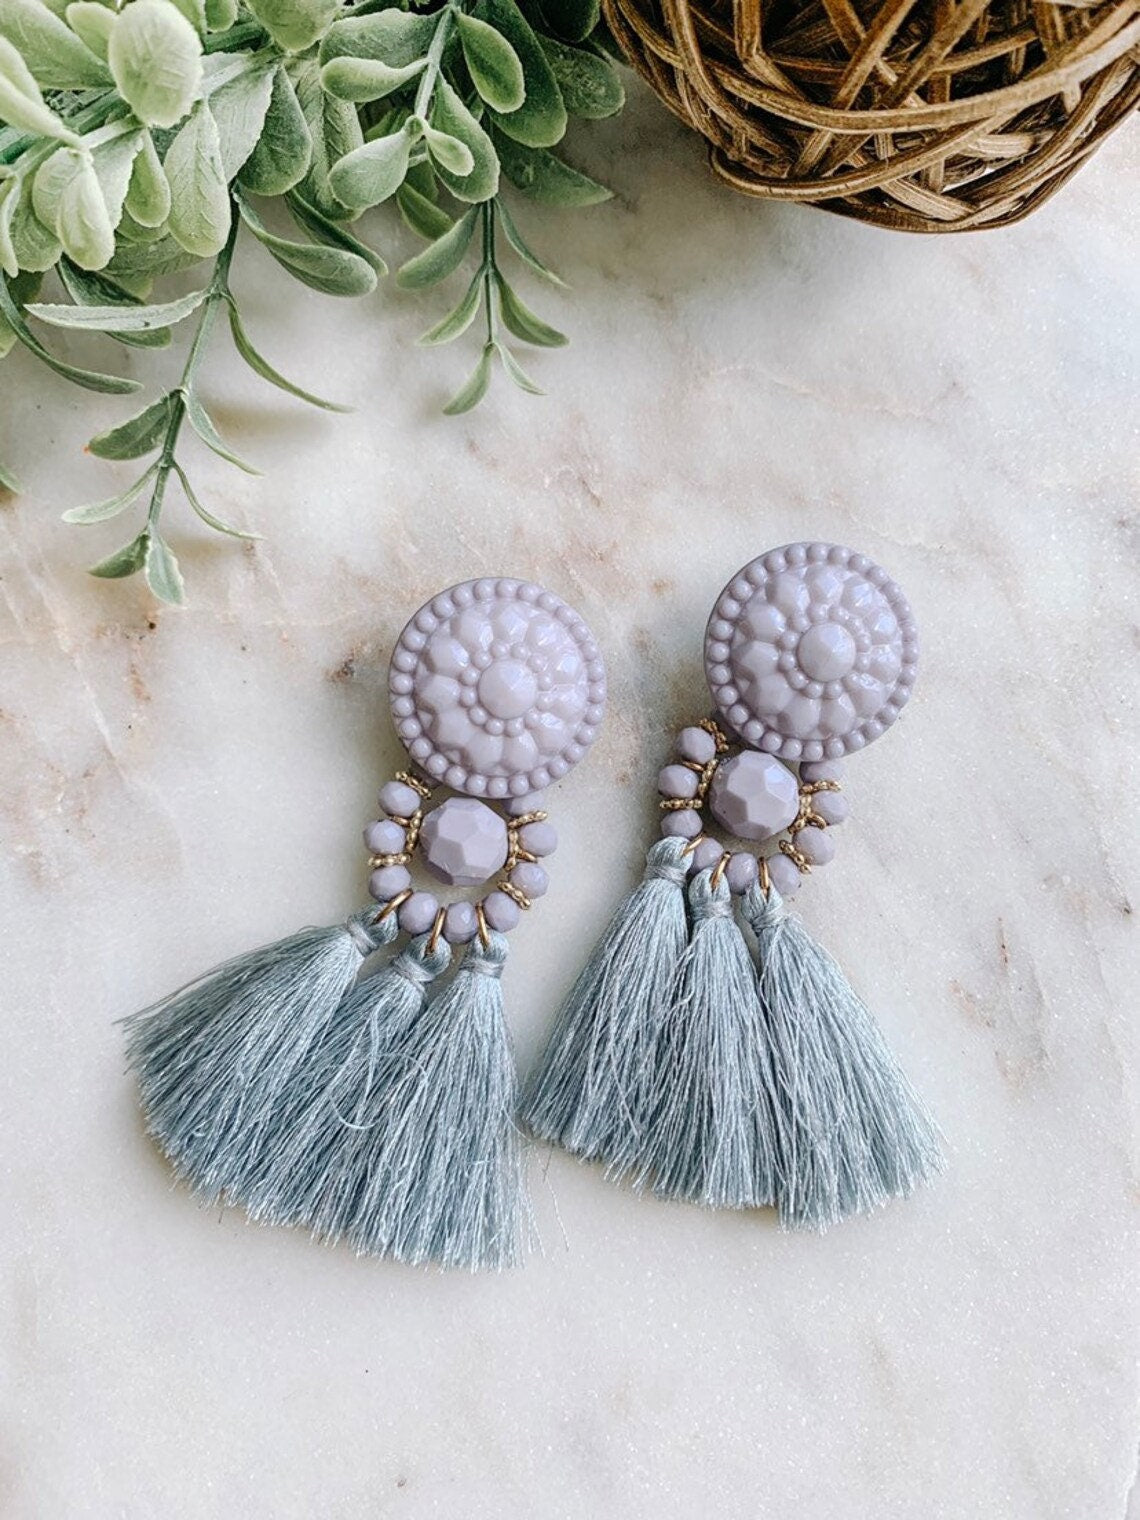 Acrylic & Tassel Earrings for Women / Statement Earrings / Tassel Earrings / Acrylic Earrings / Gift for Friend / More Colors Available